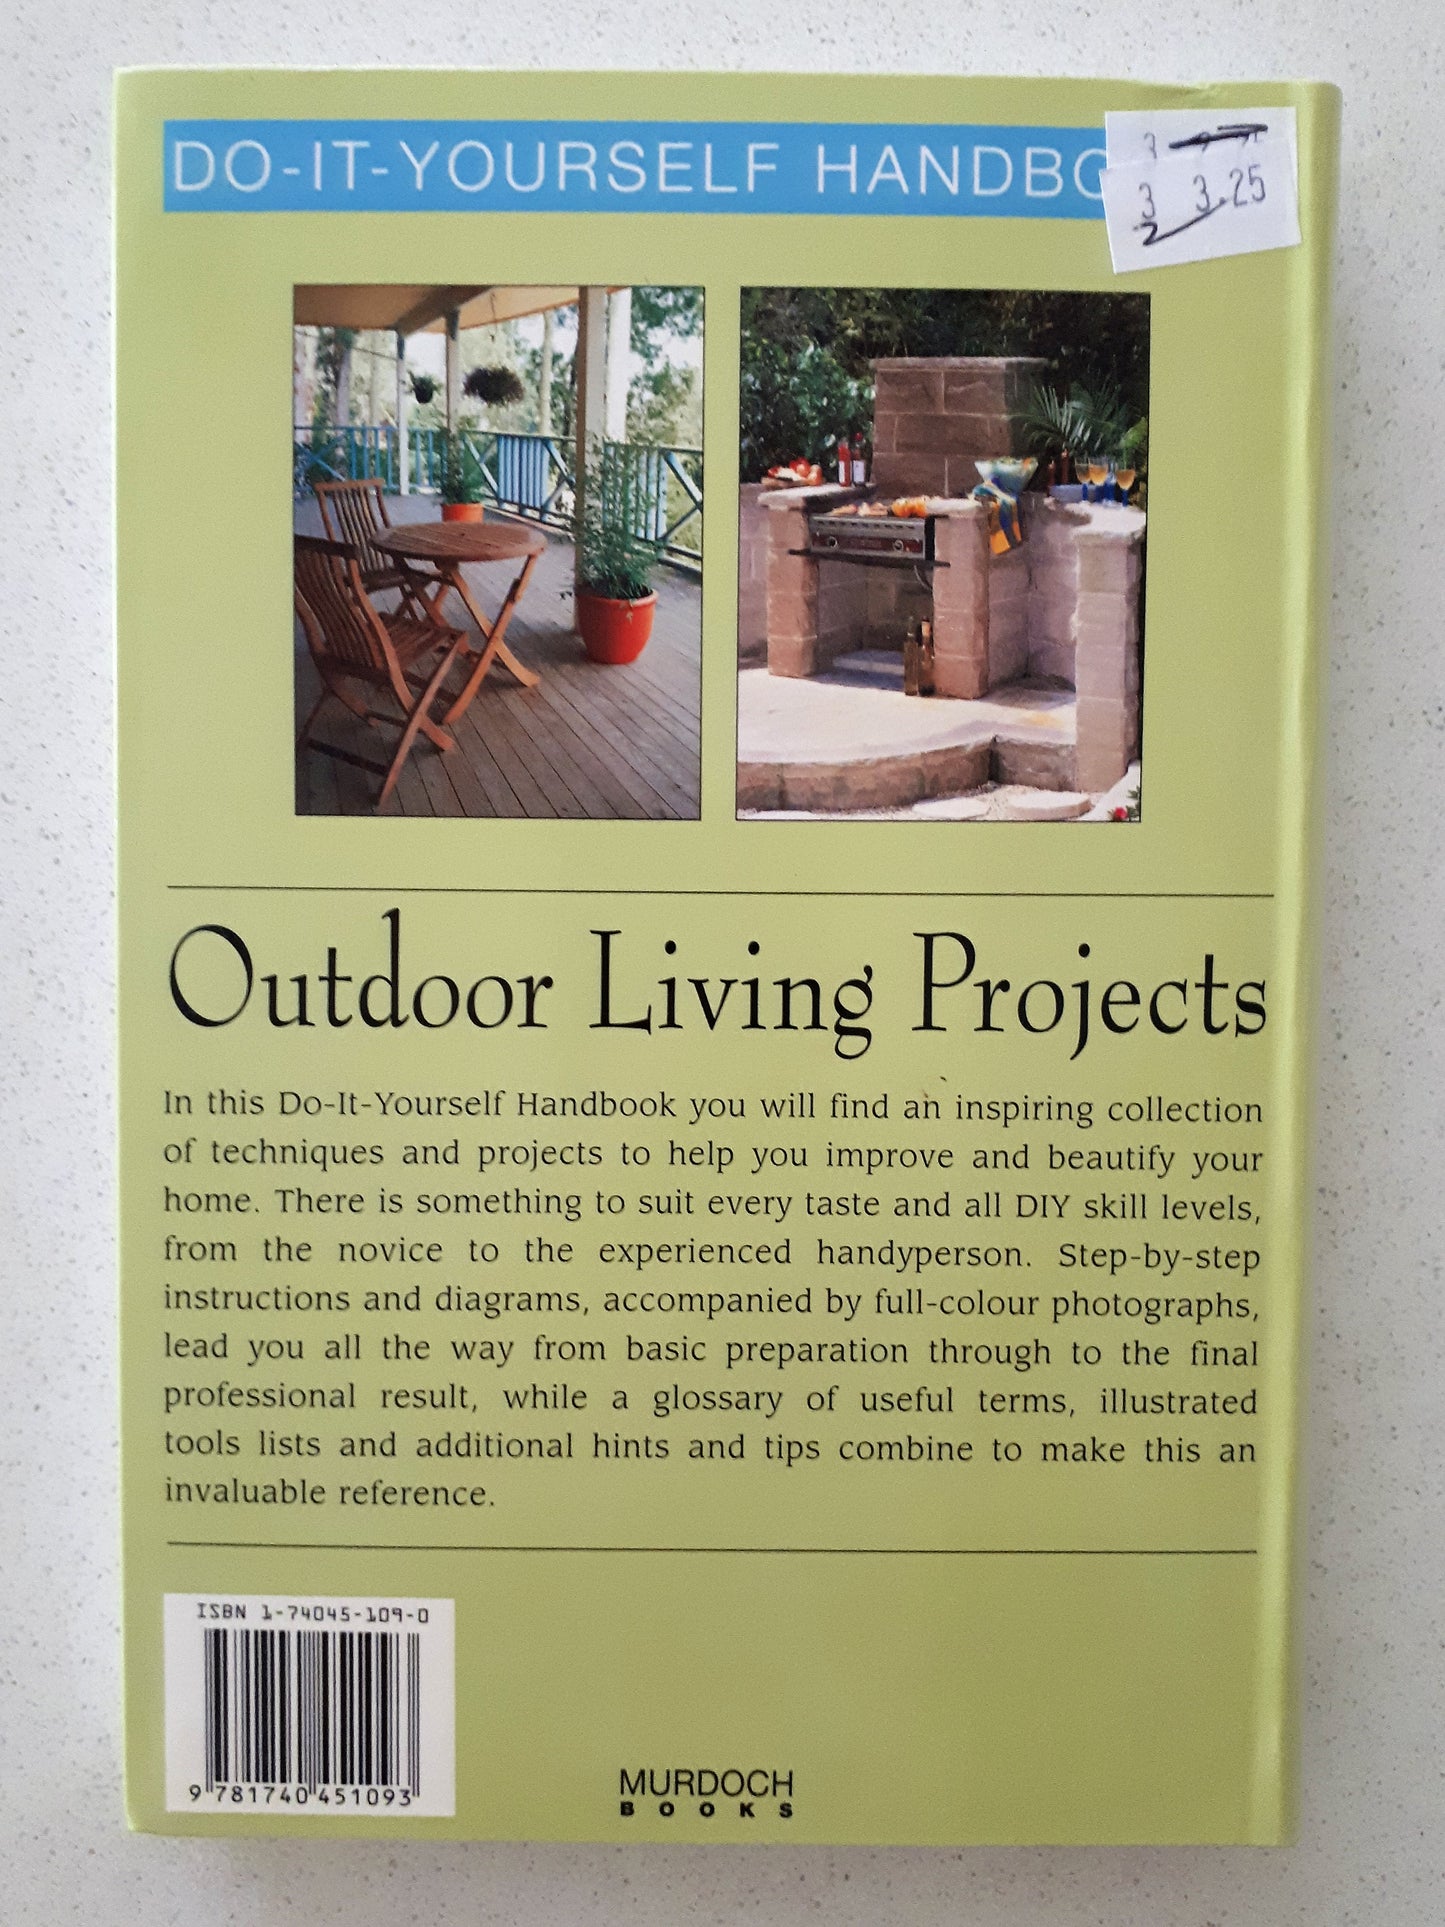 Outdoor Living Projects by John Bowler & Frank Gardner